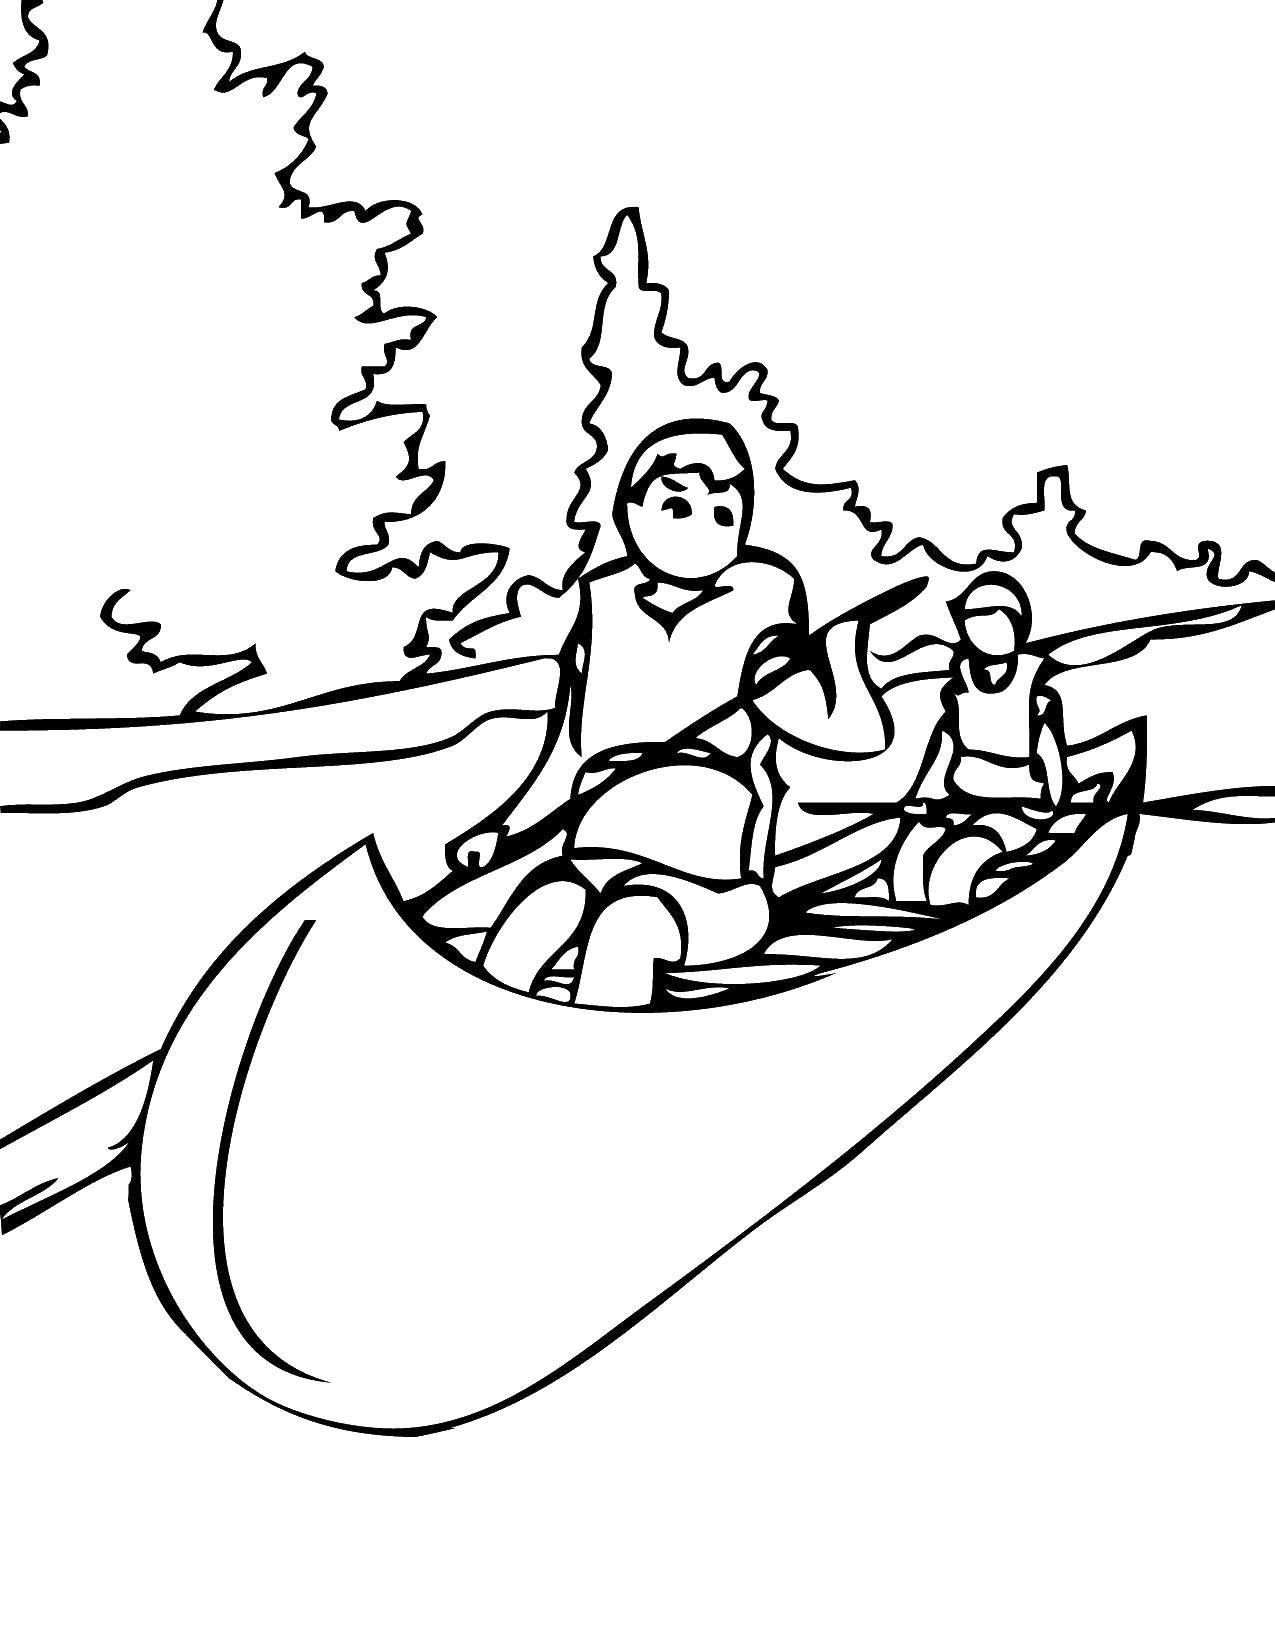 canoeing coloring pages to print